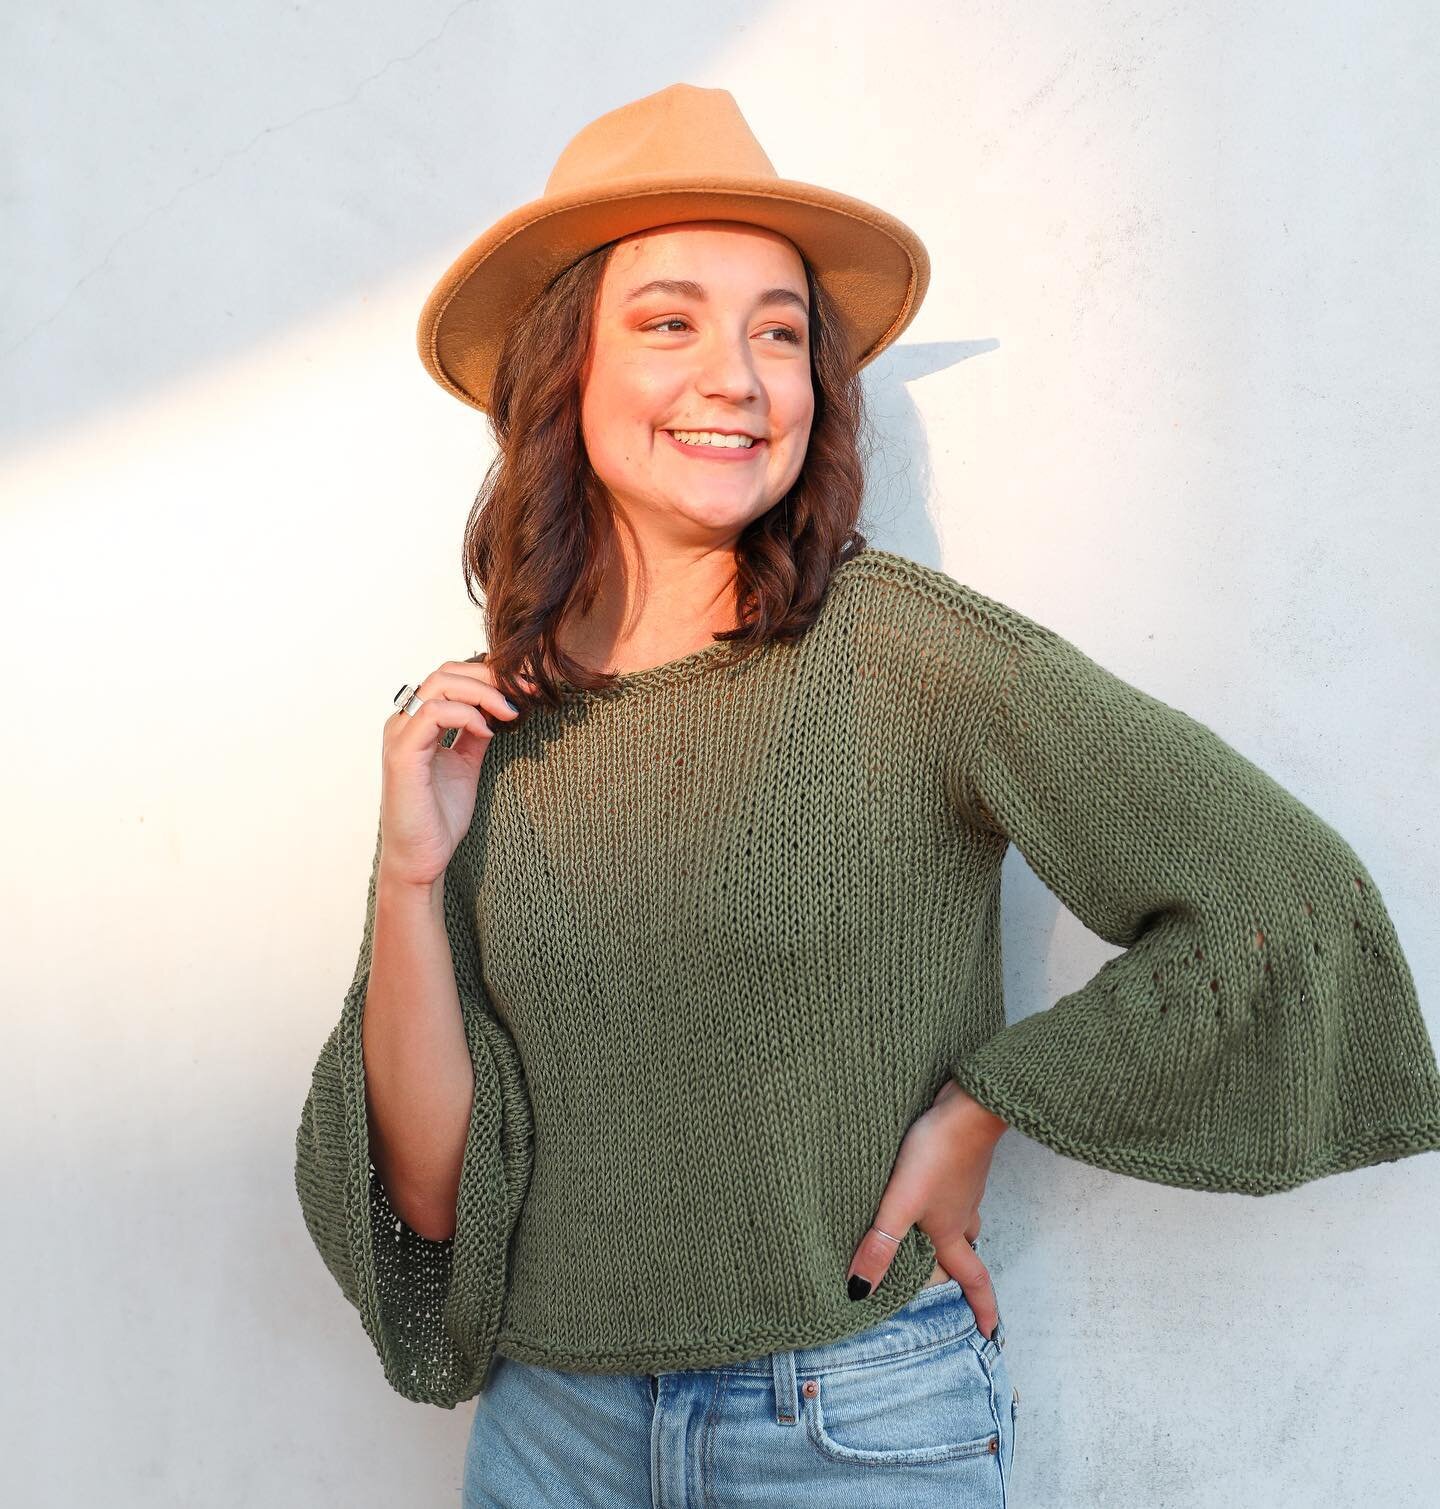 NEW FALL/WINTER 2020 COLLECTION IS LIVE! 🍁🎉 Ahhh go check out the new shop with the link in my bio + let me know what you think! ⁣
⁣
Take a look at the new Belle Pullover Sweater when you head over that way ➡️ Easy, cute and comfy, this will be a s